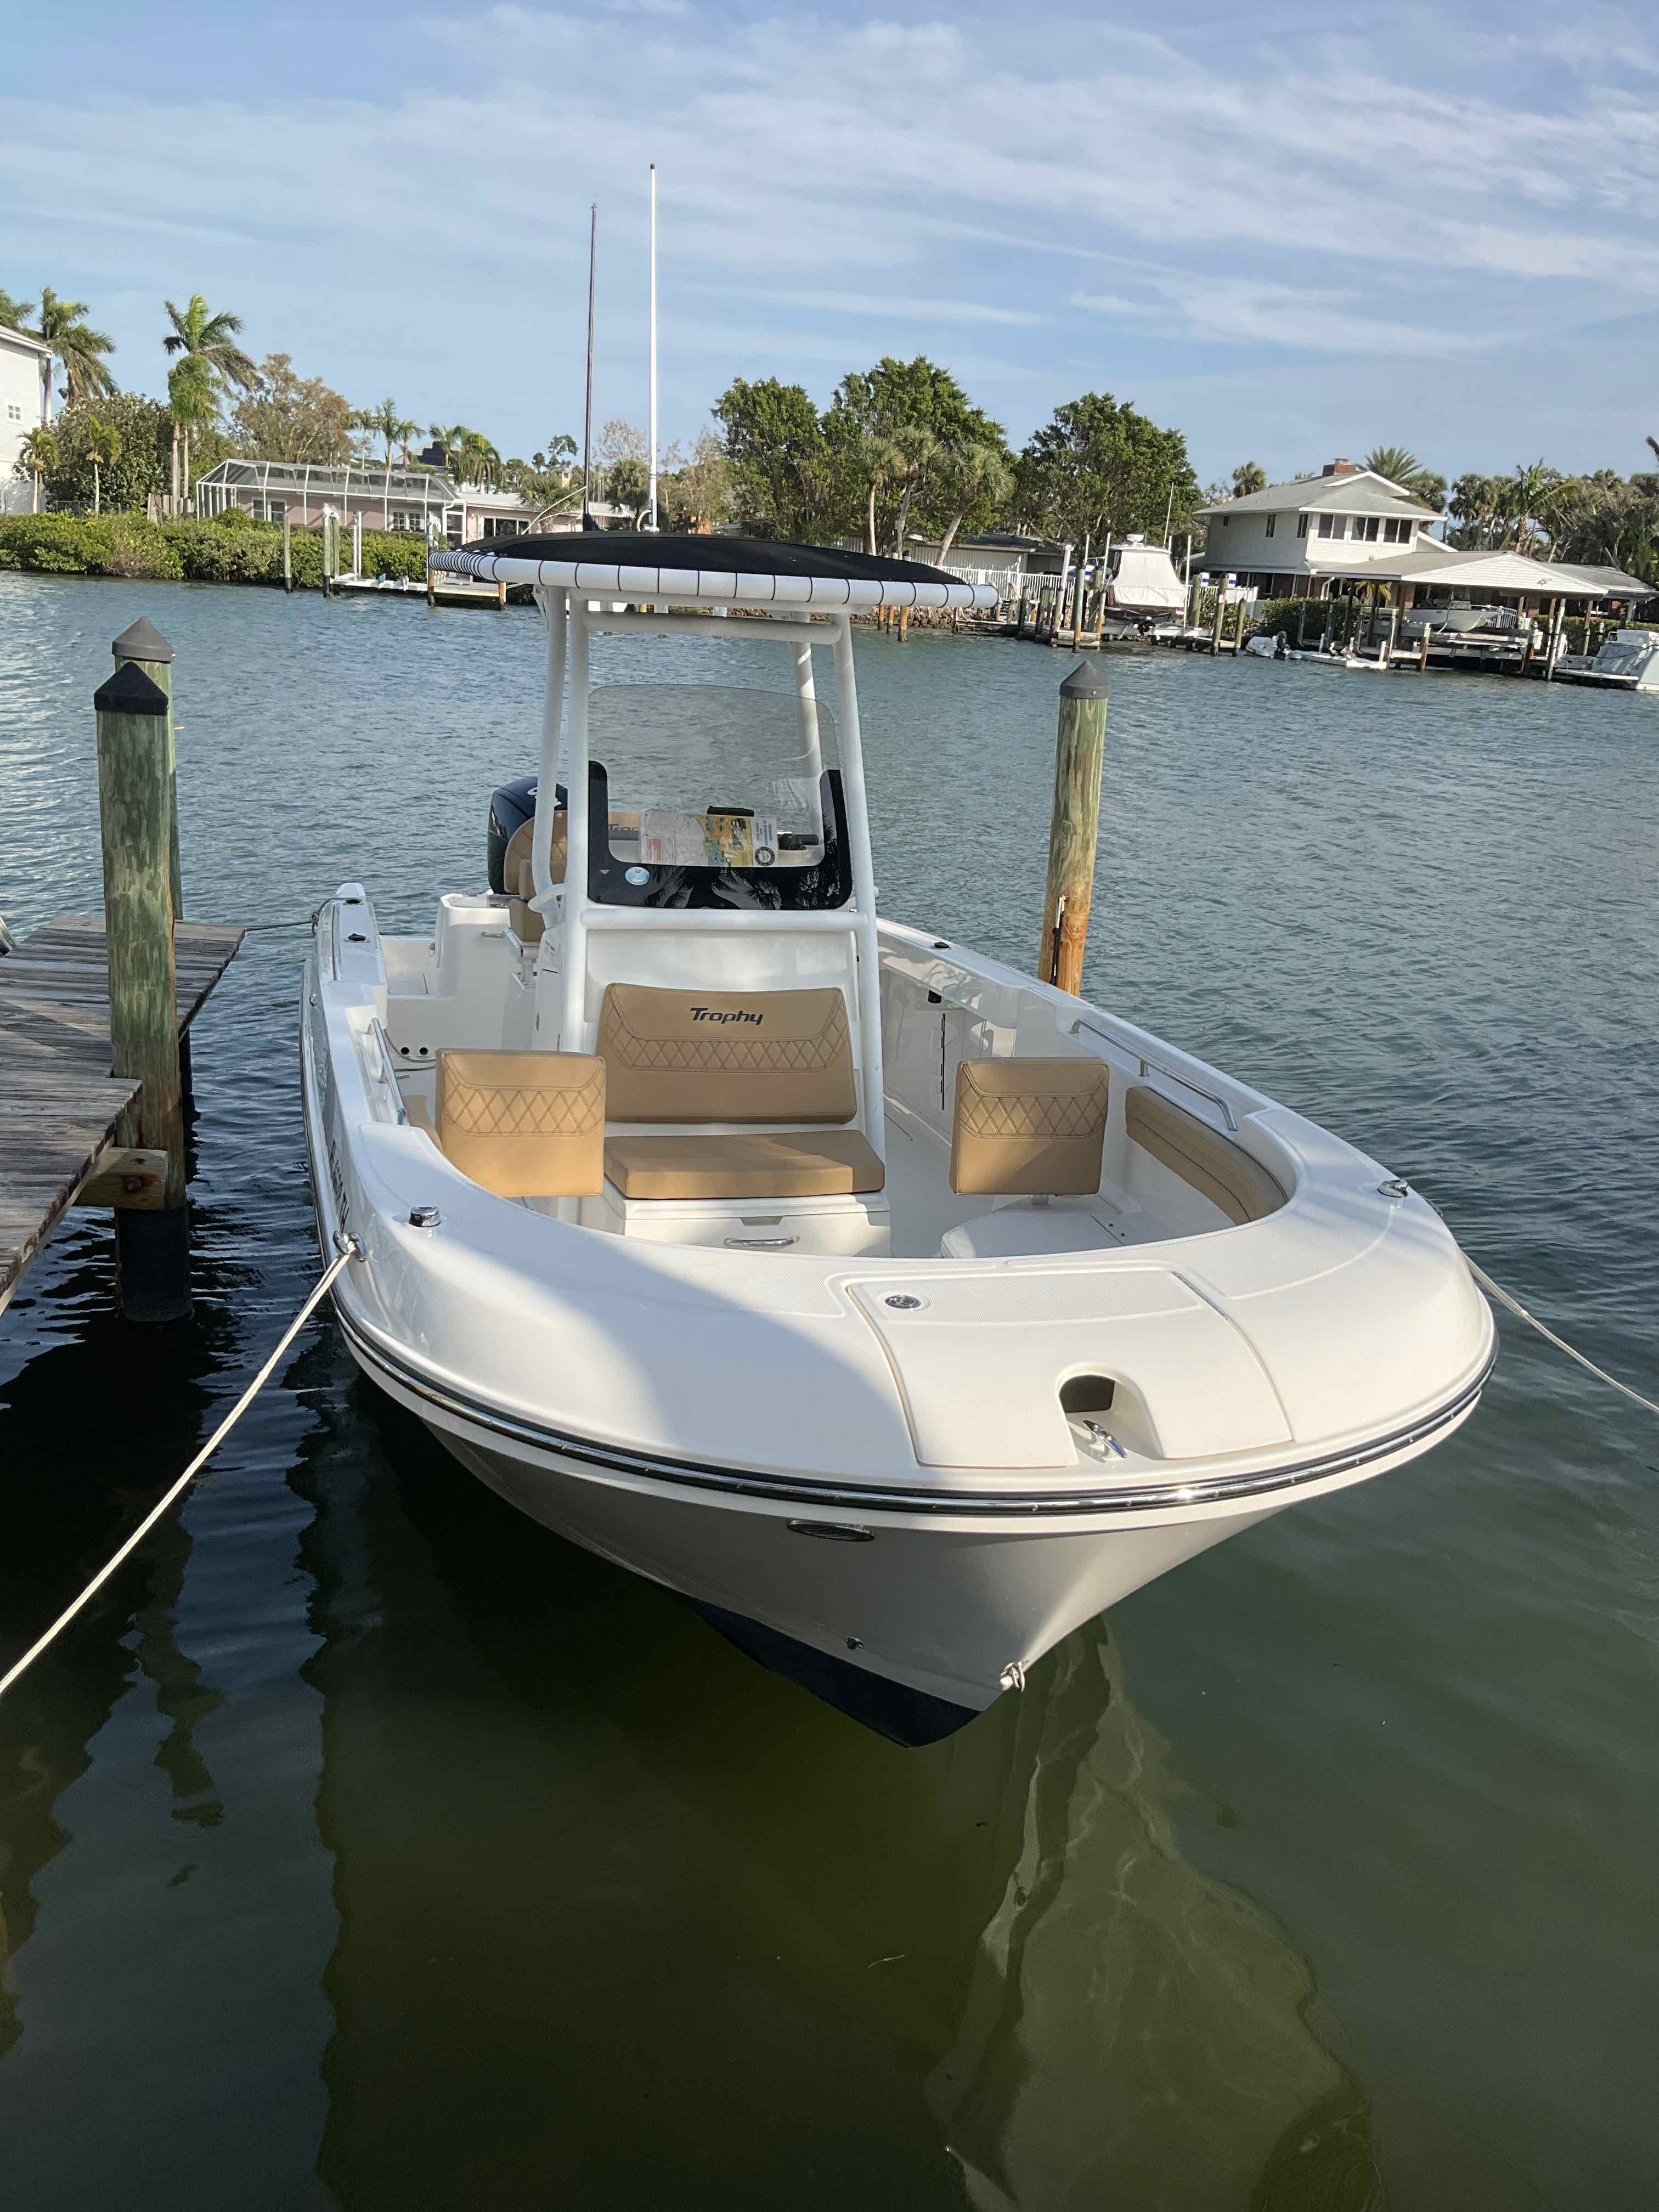 KEEP ON TROLLIN' (24FT Offshore Bayliner Trophy Center Console - 250 HP~Fishing)